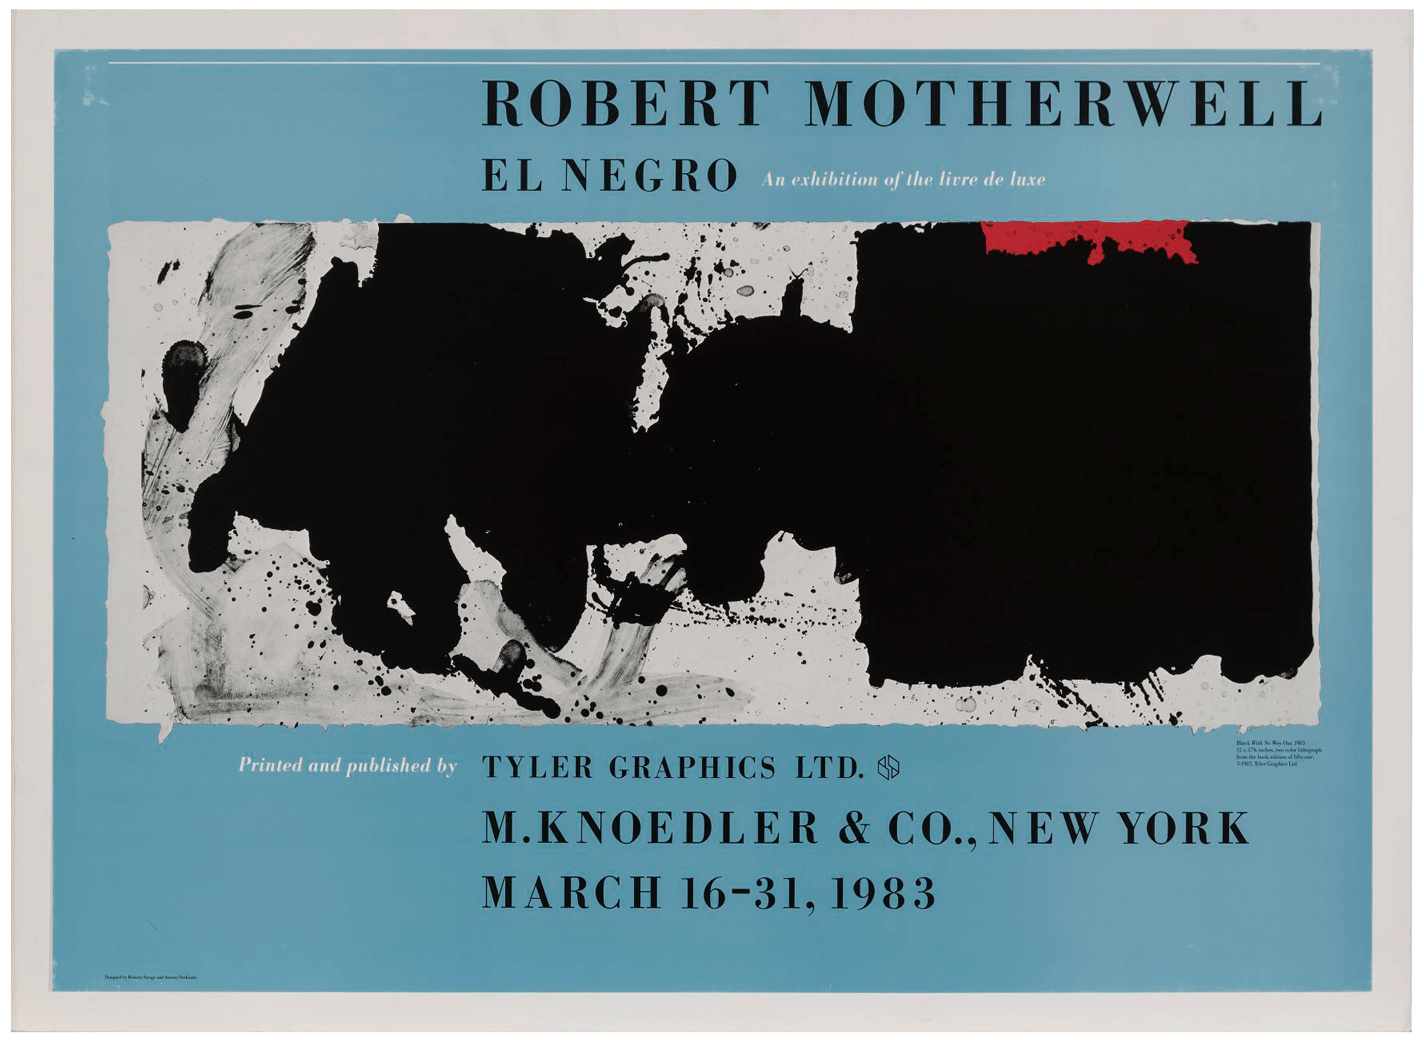 Poster for the exhibition Robert Motherwell: El Negro, An Exhibition of the Livre de Luxe, 1983. Features Motherwell's lithograph "Black with No Way Out" on a blue background.